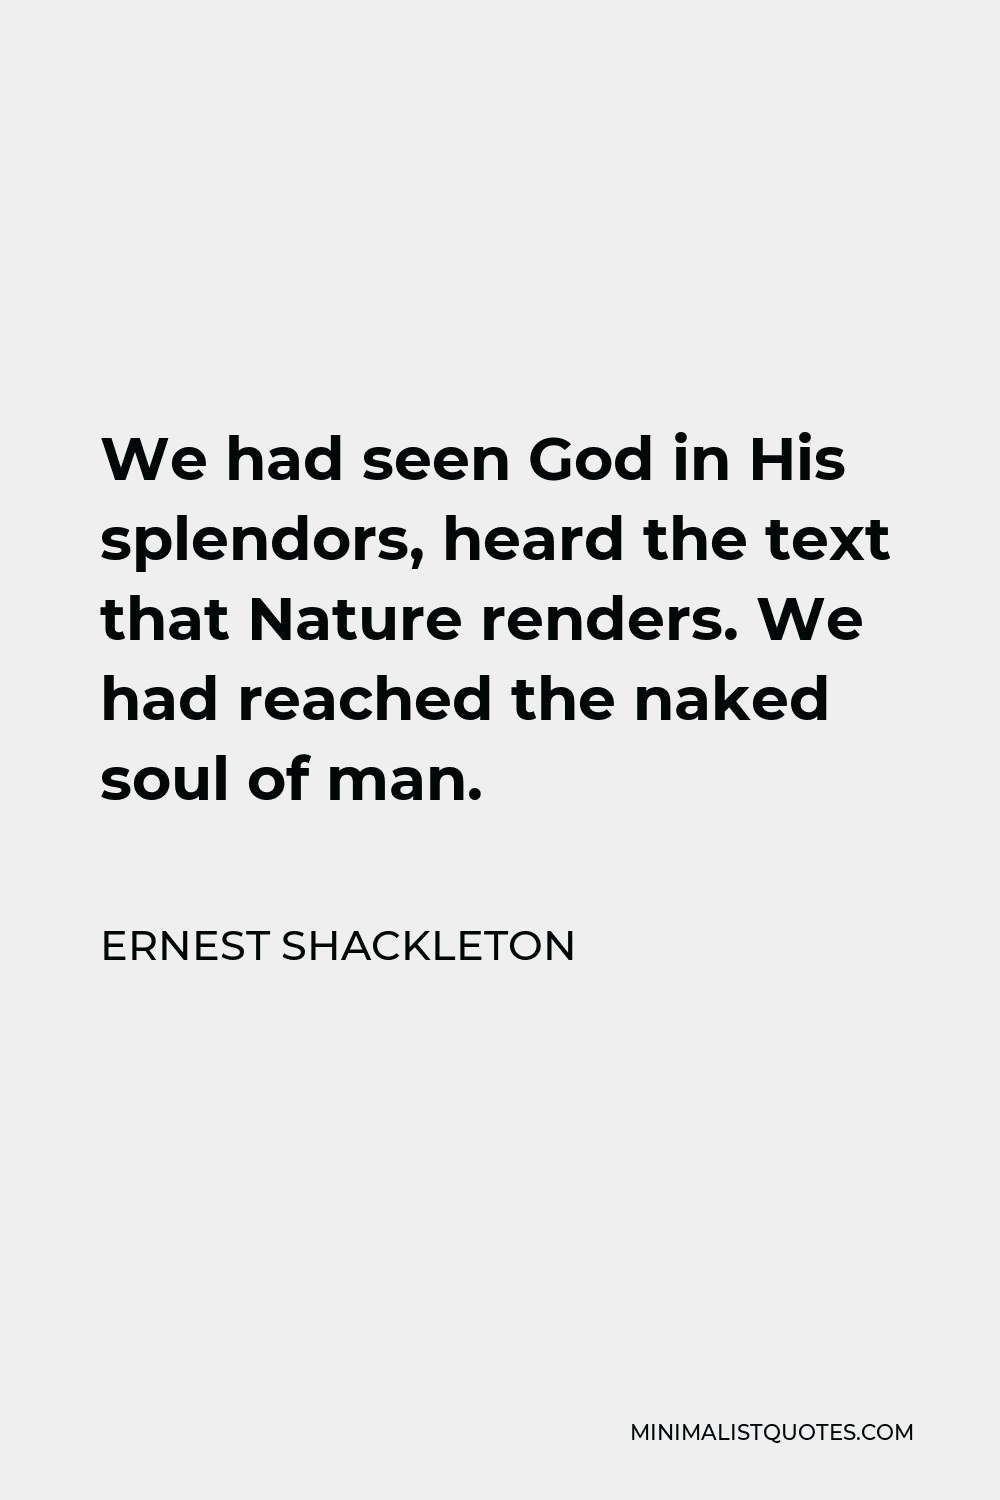 Ernest Shackleton Quote - We had seen God in His splendors, heard the text that Nature renders. We had reached the naked soul of man.